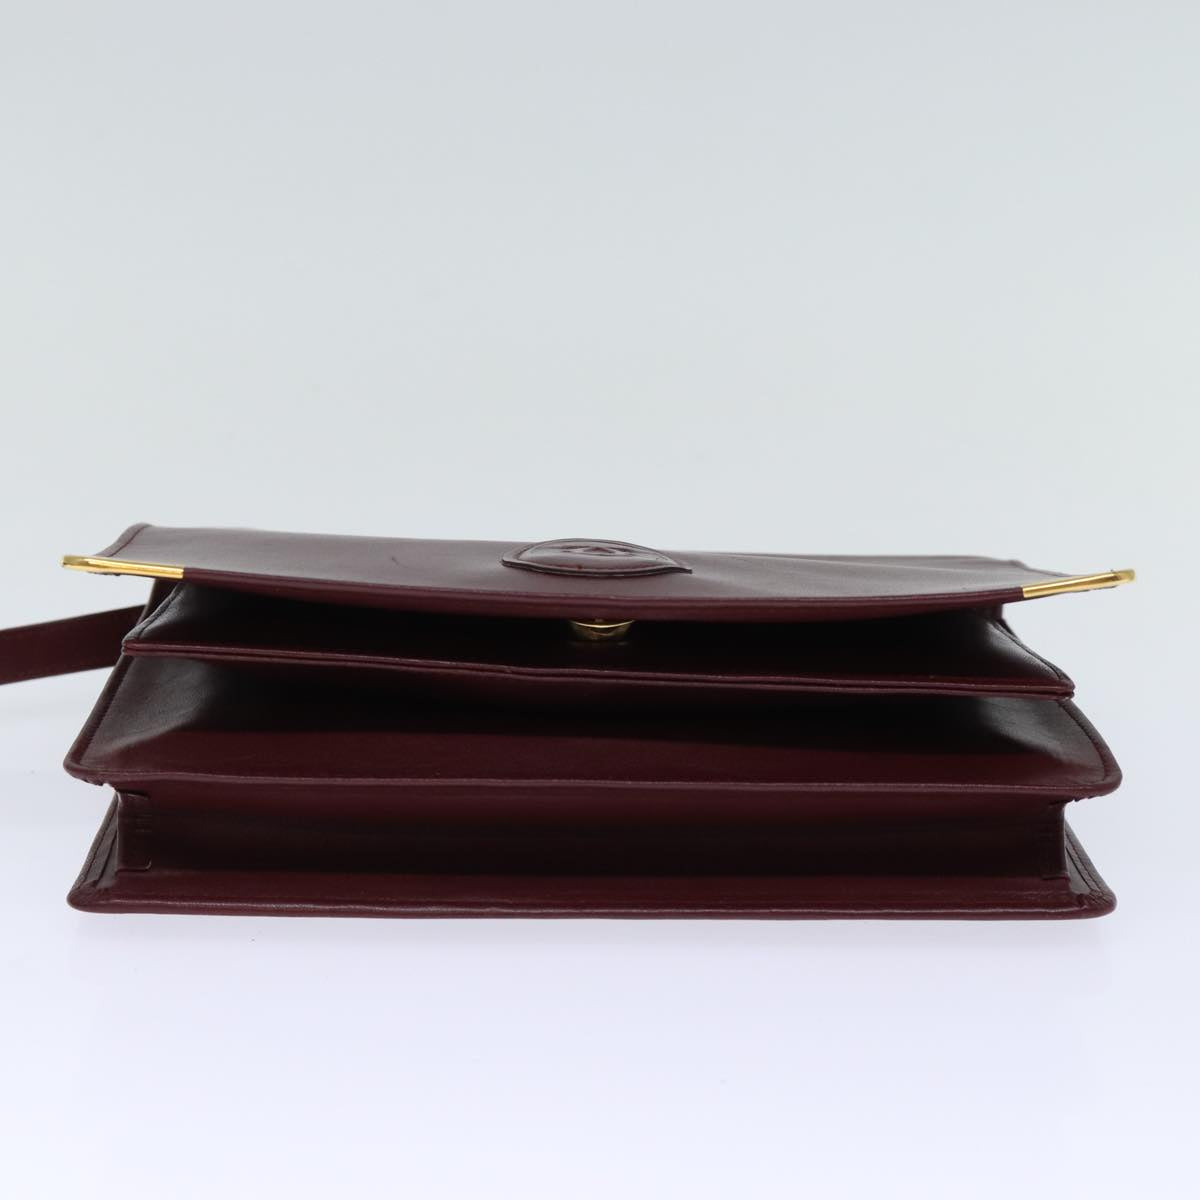 CARTIER Clutch Bag Leather Wine Red Auth bs13974